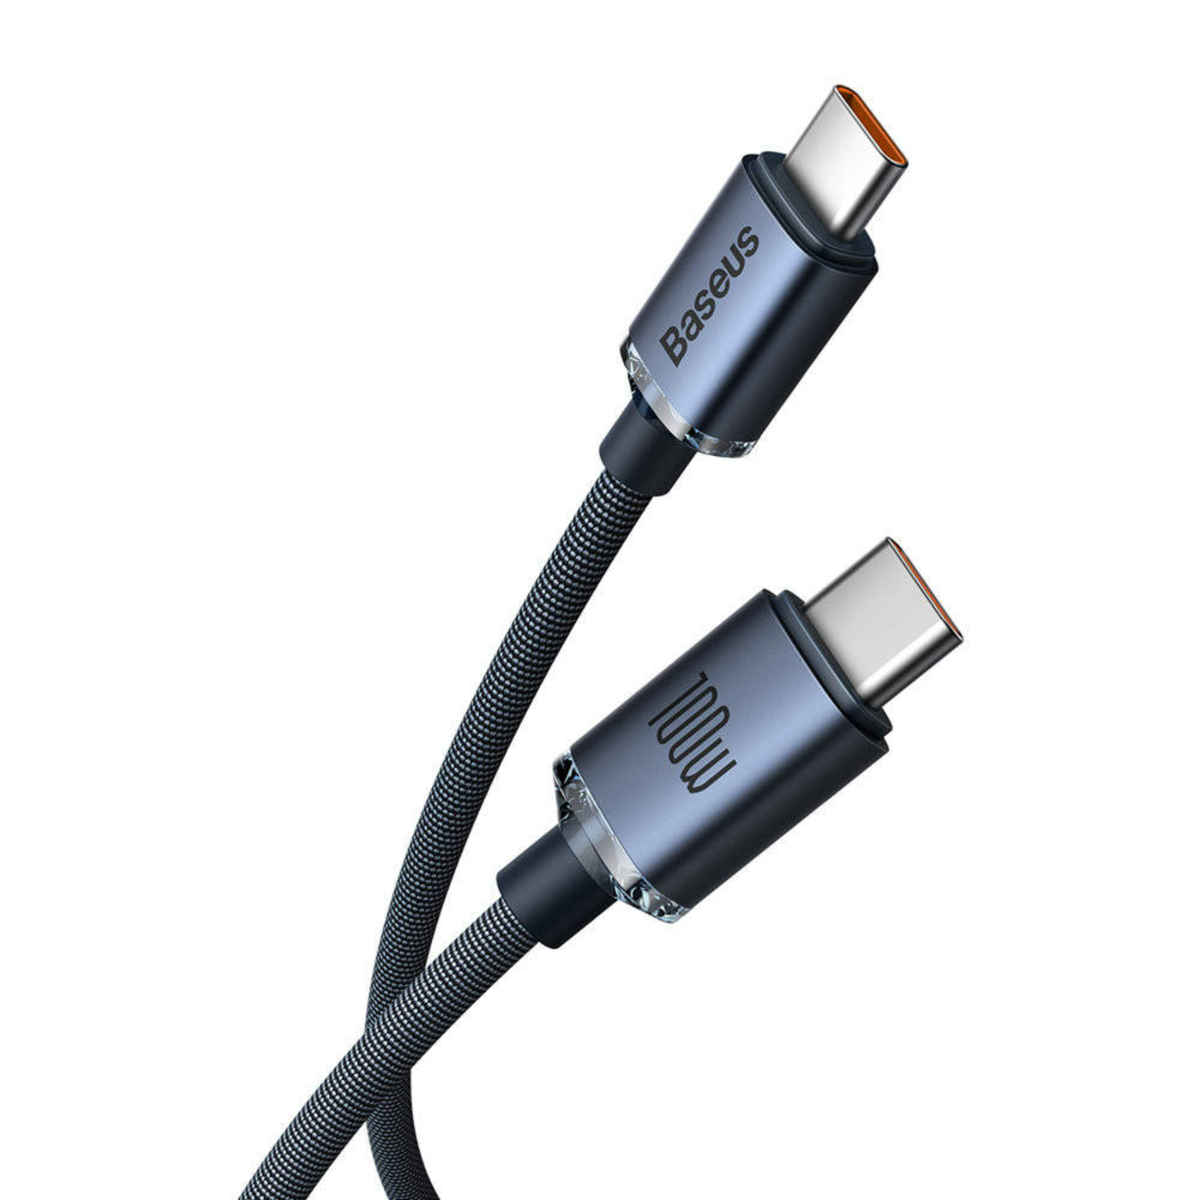 Baseus Type C to C Fast Charging Data Cable, 100 W, 1.2 m, CAJY000601